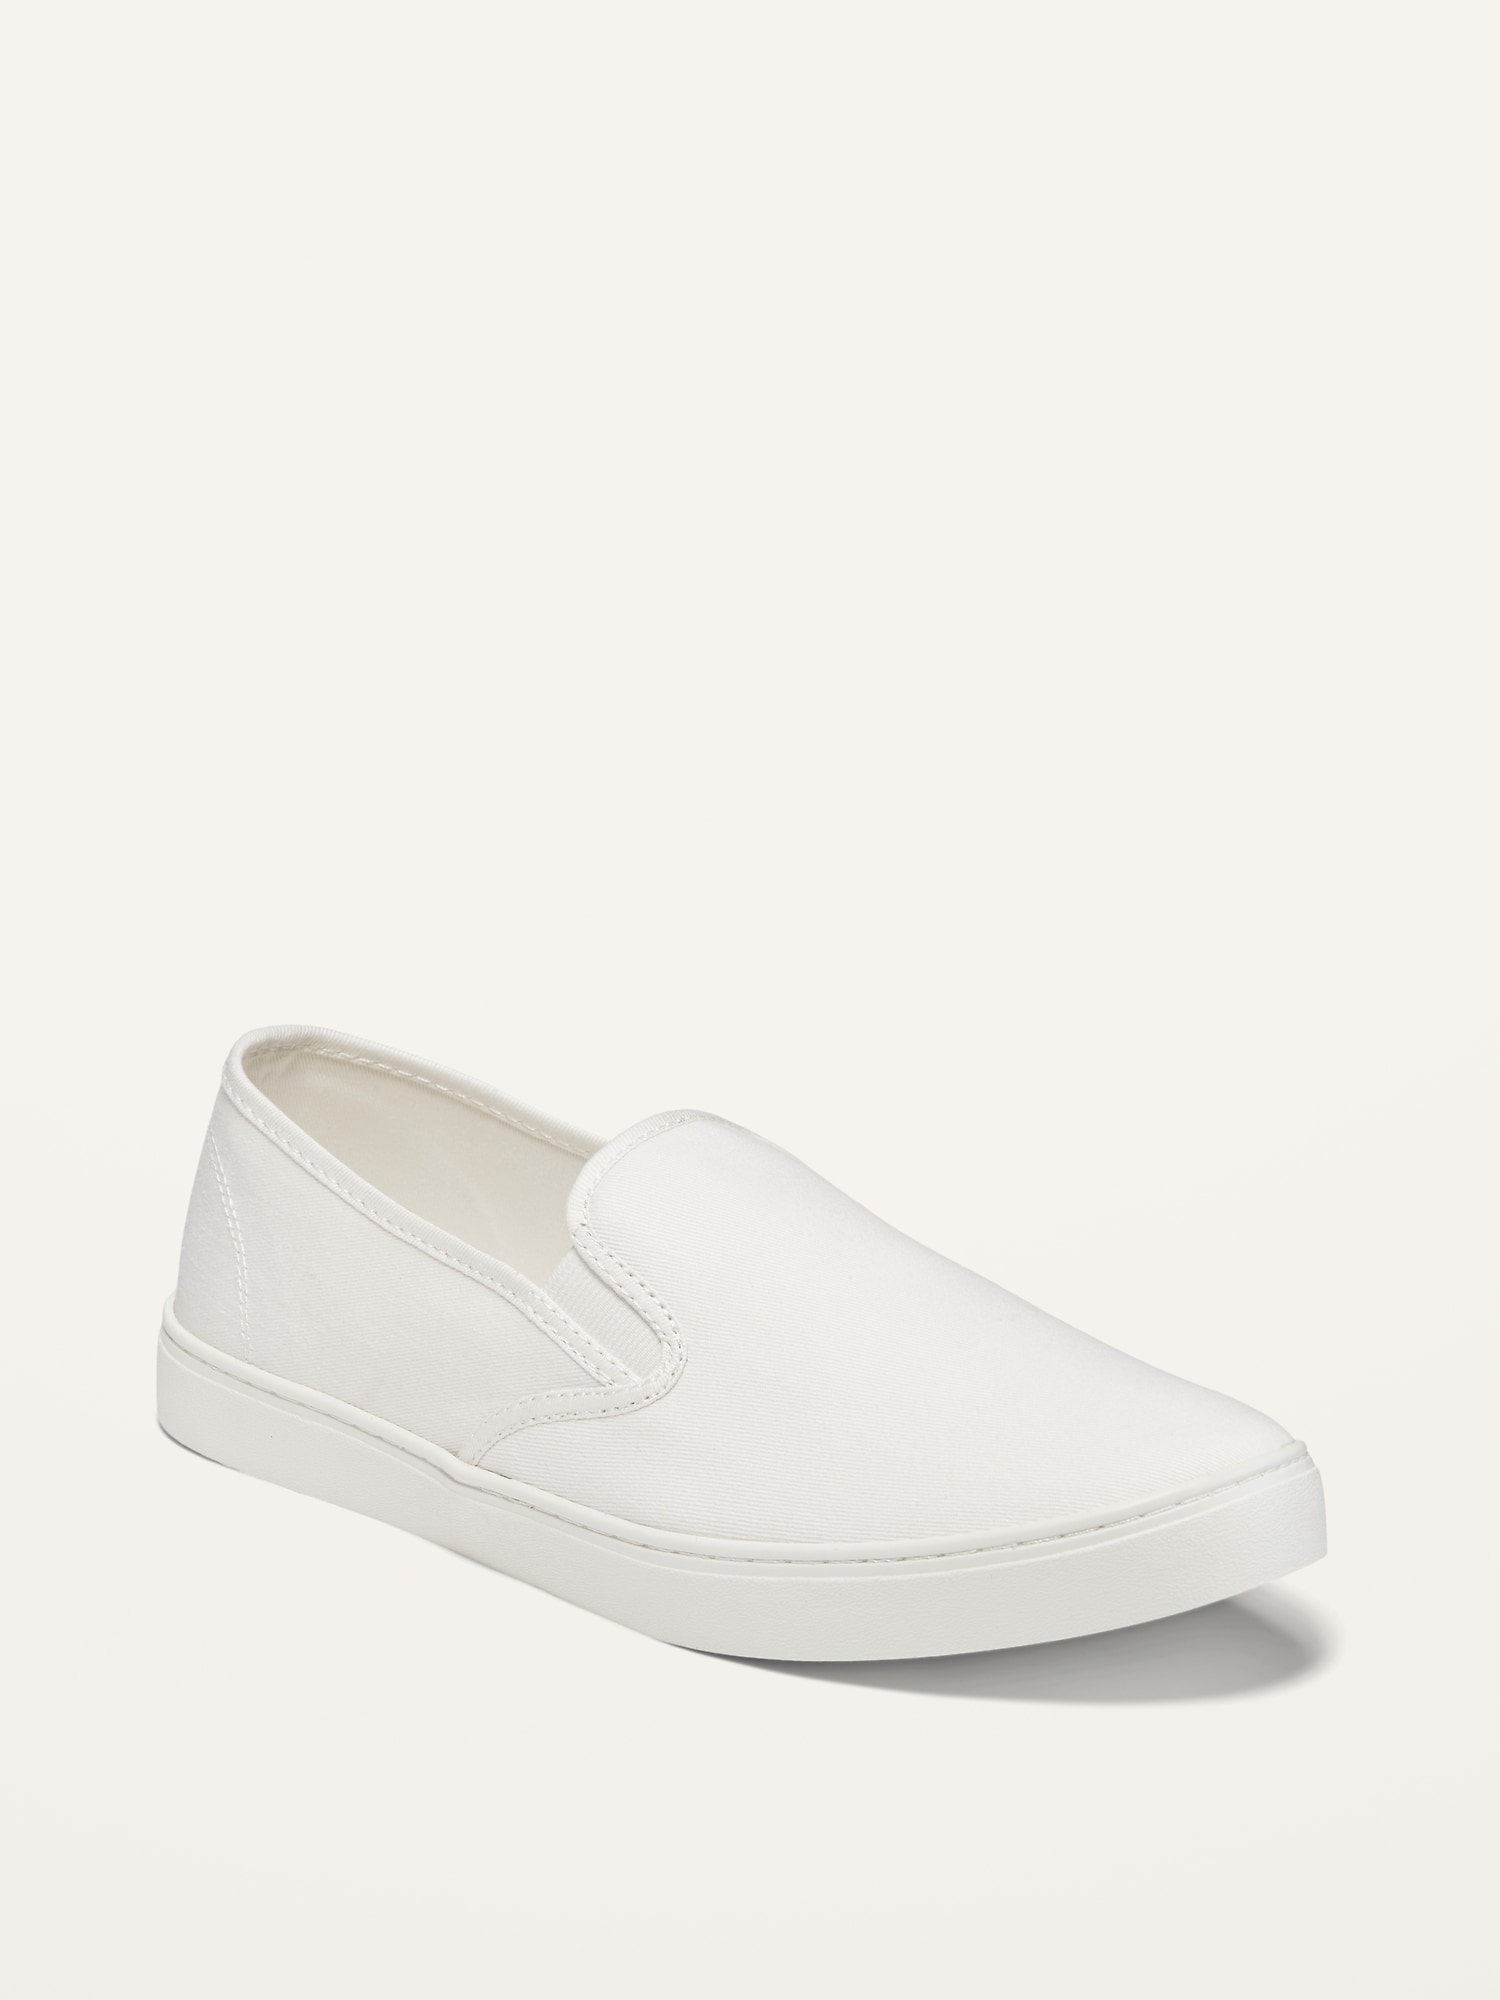 white slip on canvas shoes womens